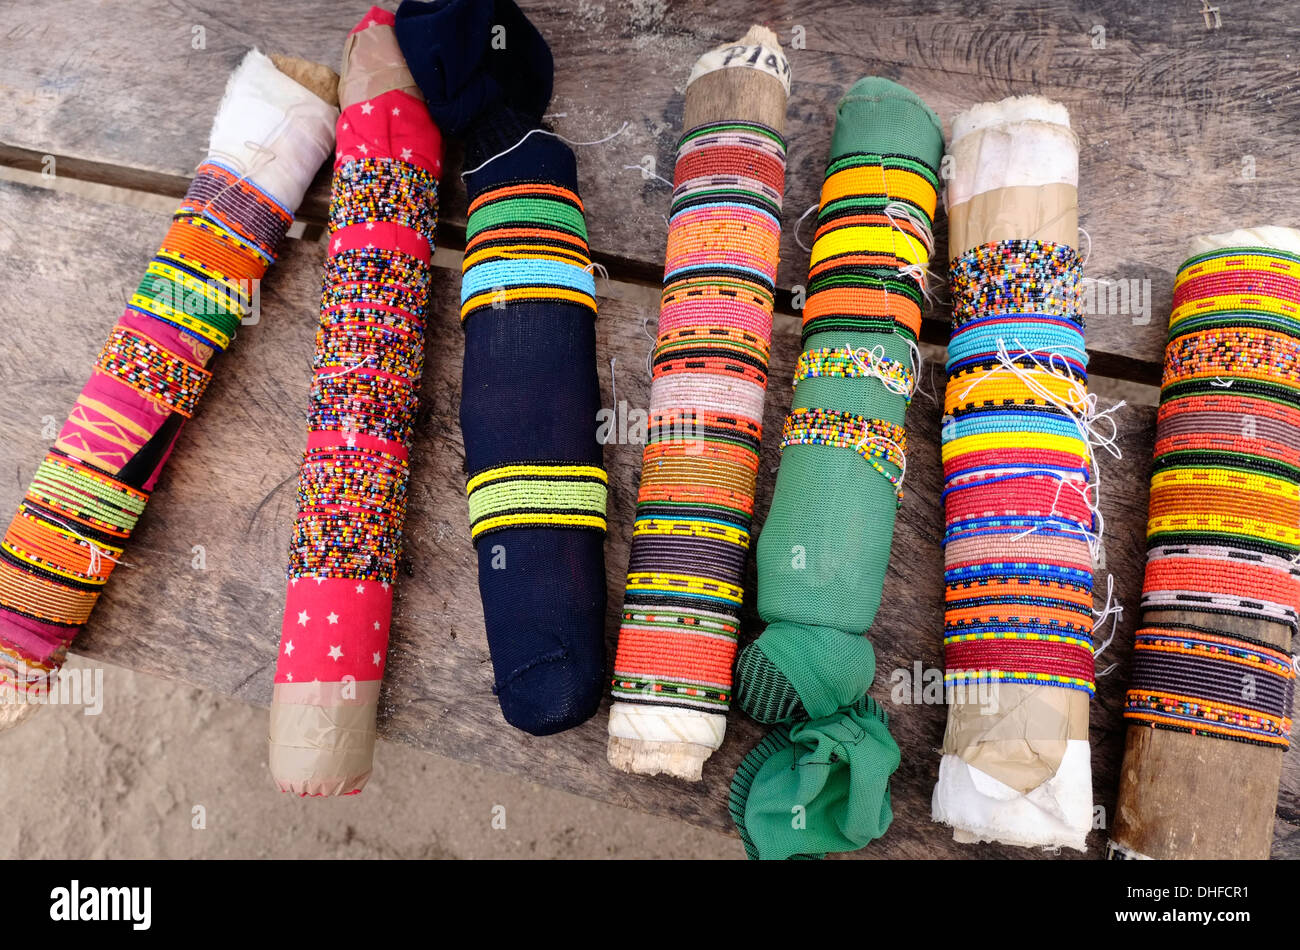 Selection of traditional beaded leg ornament worn by most women in the 'Comarca' (region) of the Guna Yala natives known as Kuna located in the archipelago of San Blas Blas islands in the Northeast of Panama facing the Caribbean Sea. Stock Photo